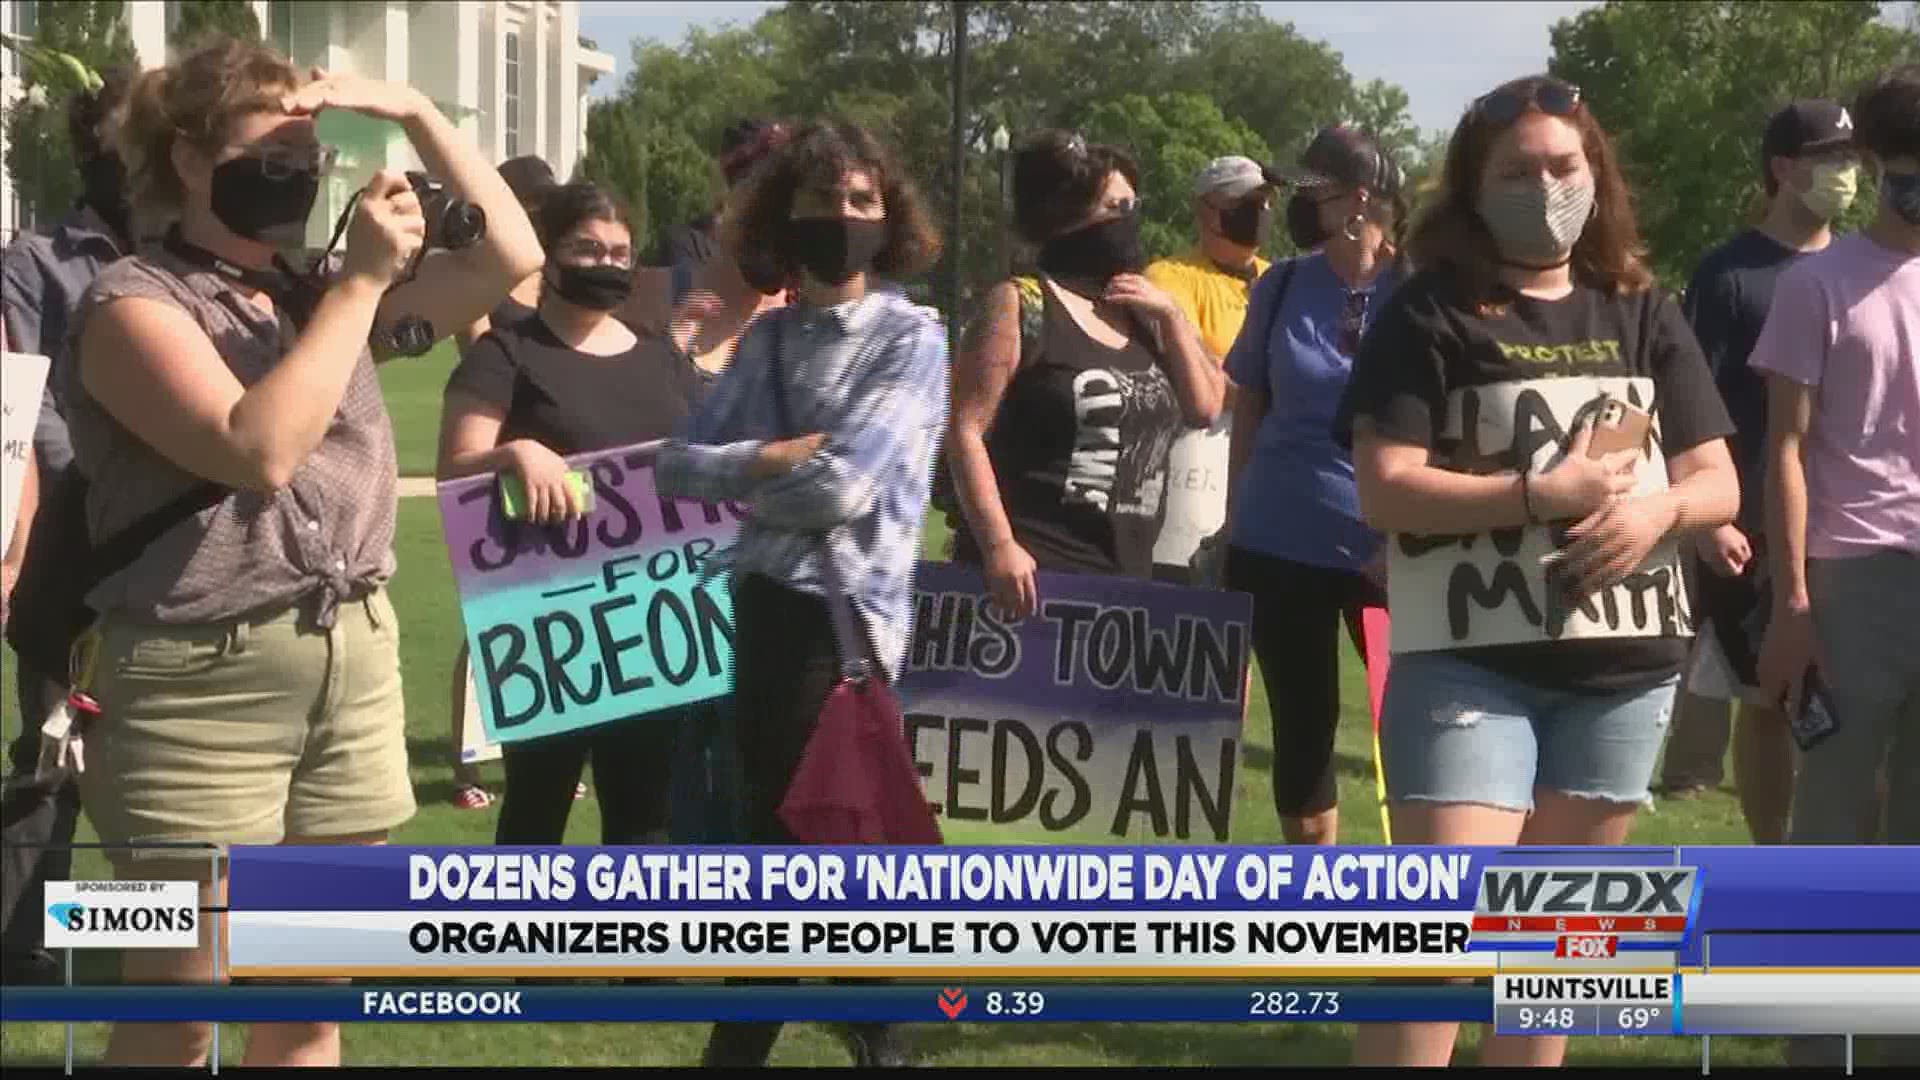 Organizers gather in Huntsville for 'Nationwide Day of Action/Protest'